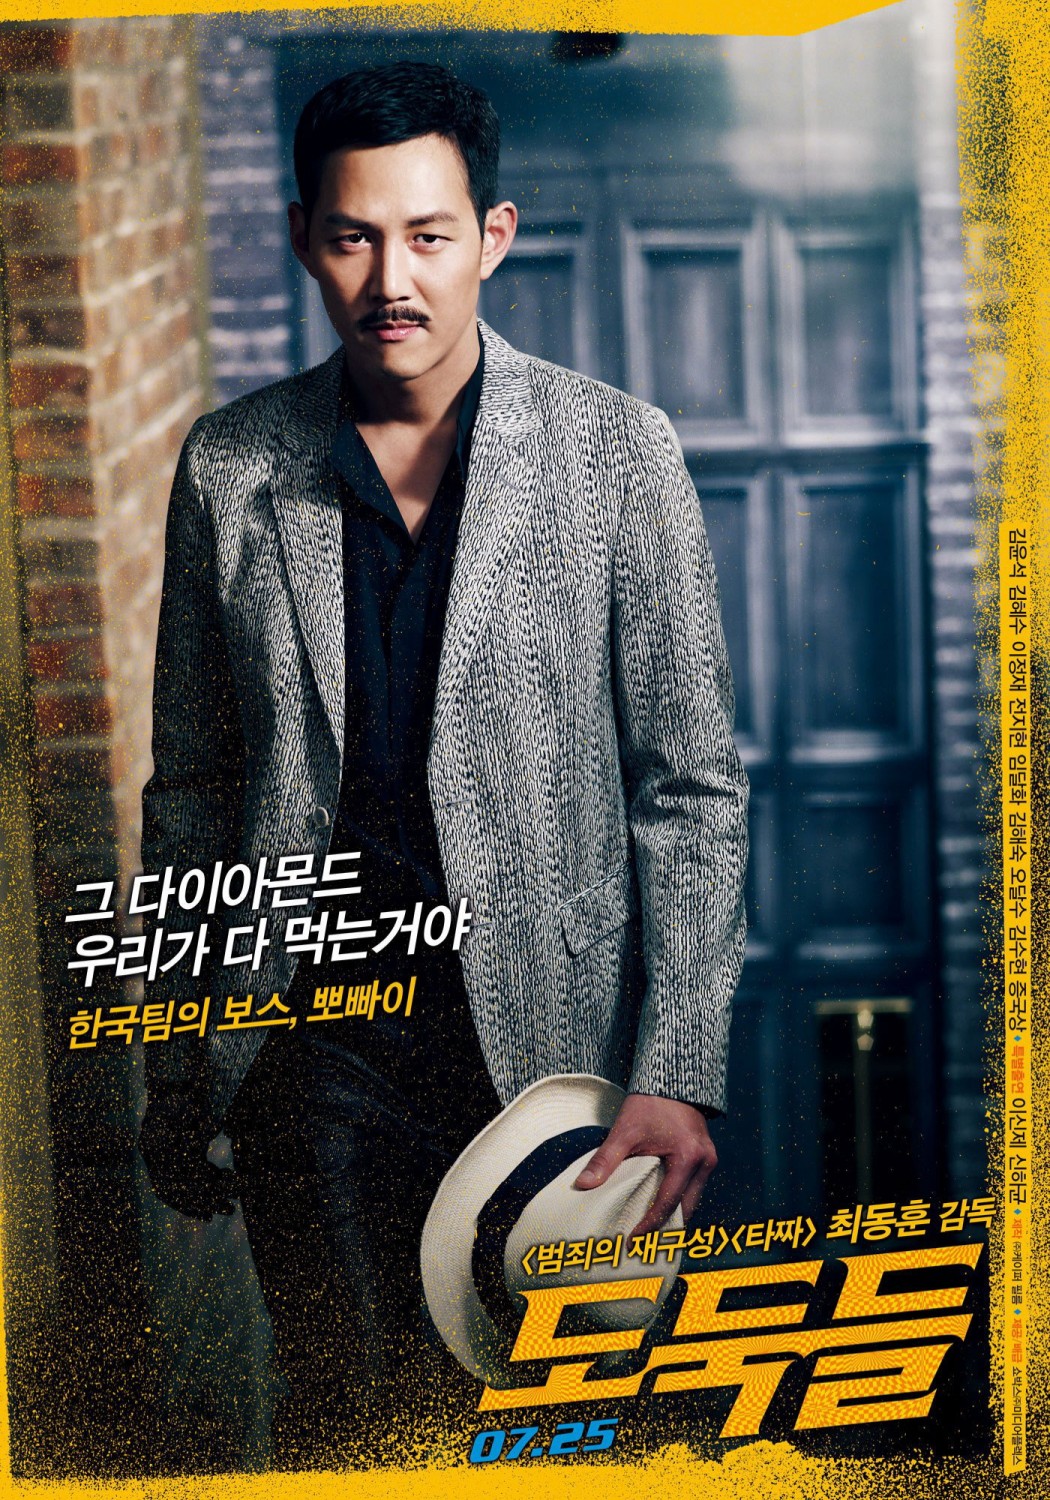 Extra Large Movie Poster Image for Dodookdeul (#3 of 9)